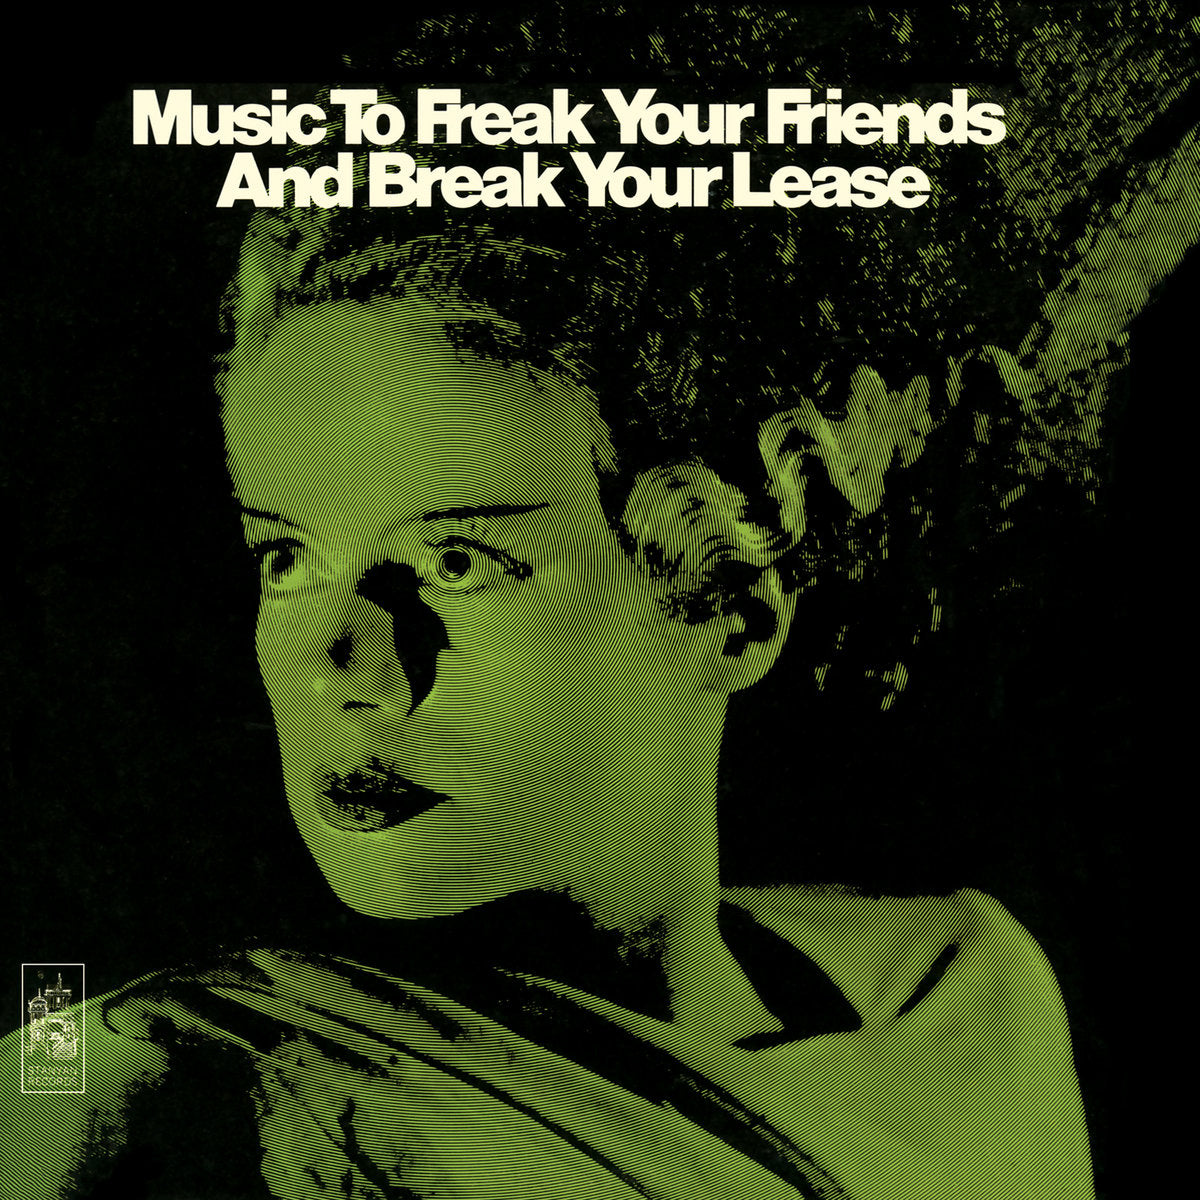 Hoffman-Richter, Heins "Music to Freak Your Friends and Break Your Lease" [Seaglass w/ Black Swirl Vinyl]